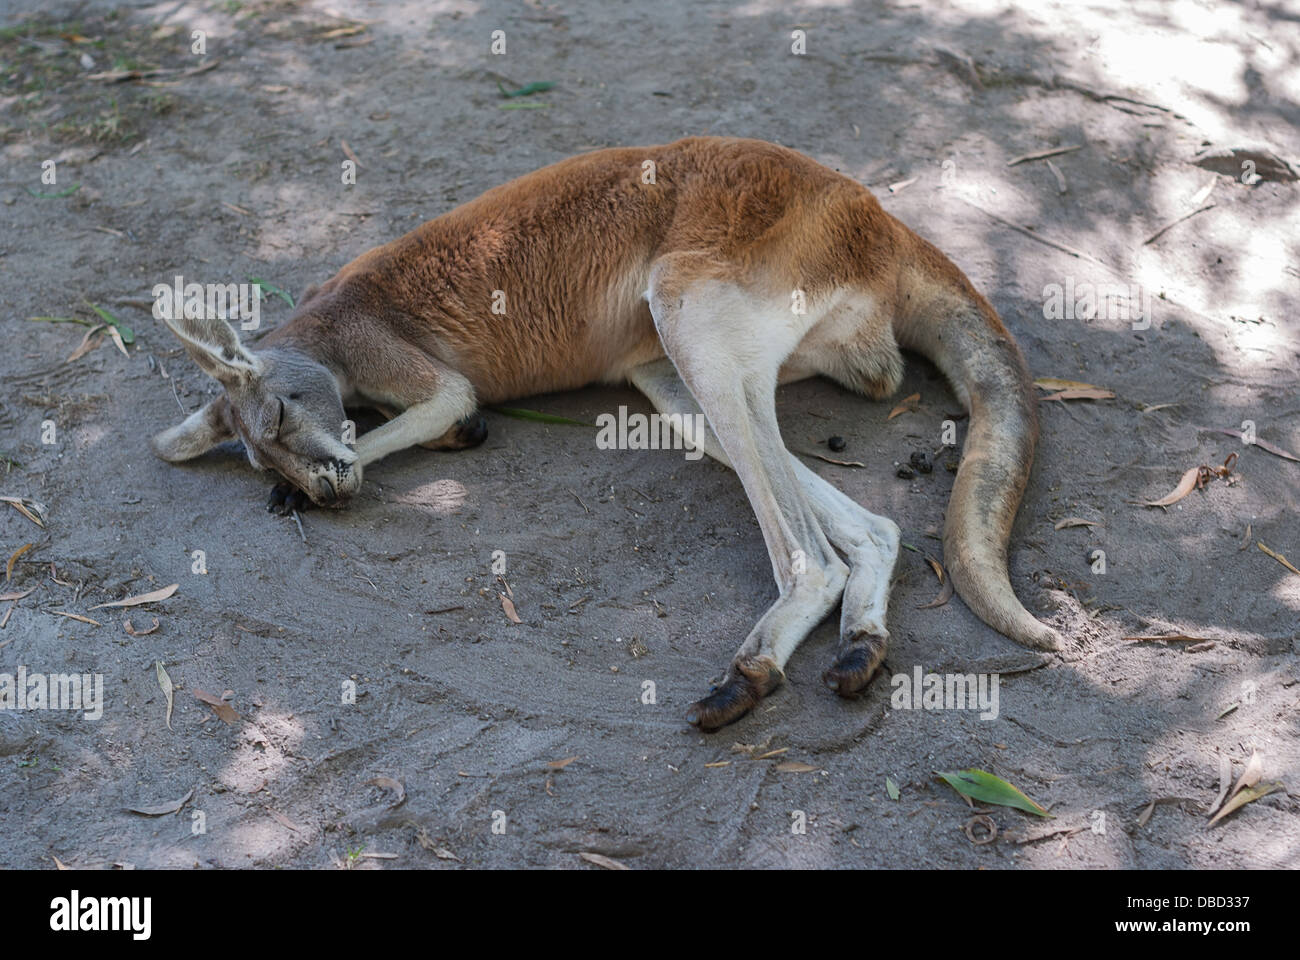 A red kangaroo sleeping on the ground using its front paws as a pillow Stock Photo